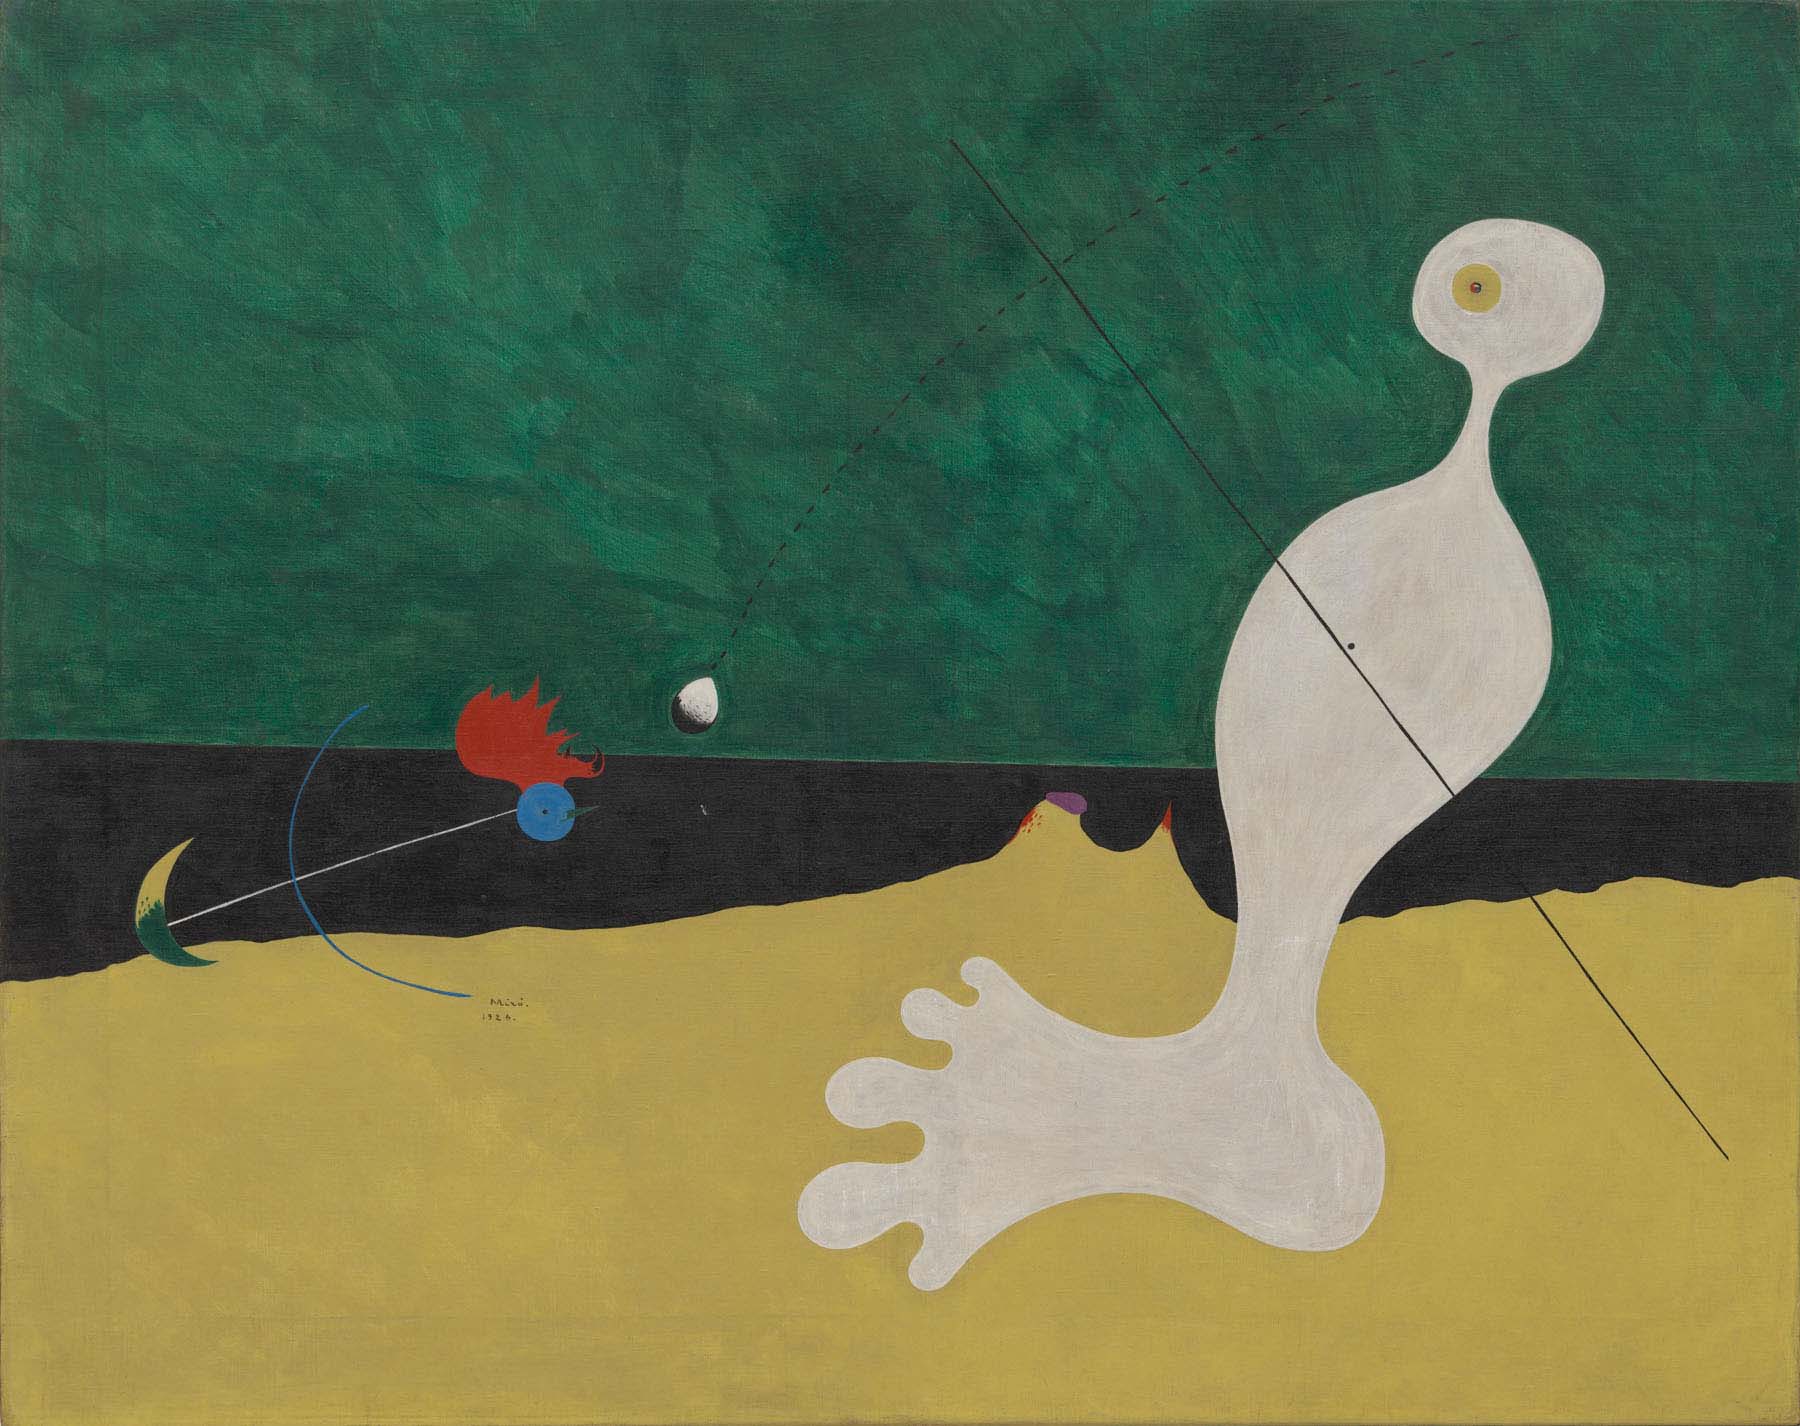 An abstract painting with large fields of green, black, and yellow, a white human-like figure with one foot, and a small blue and red creature.